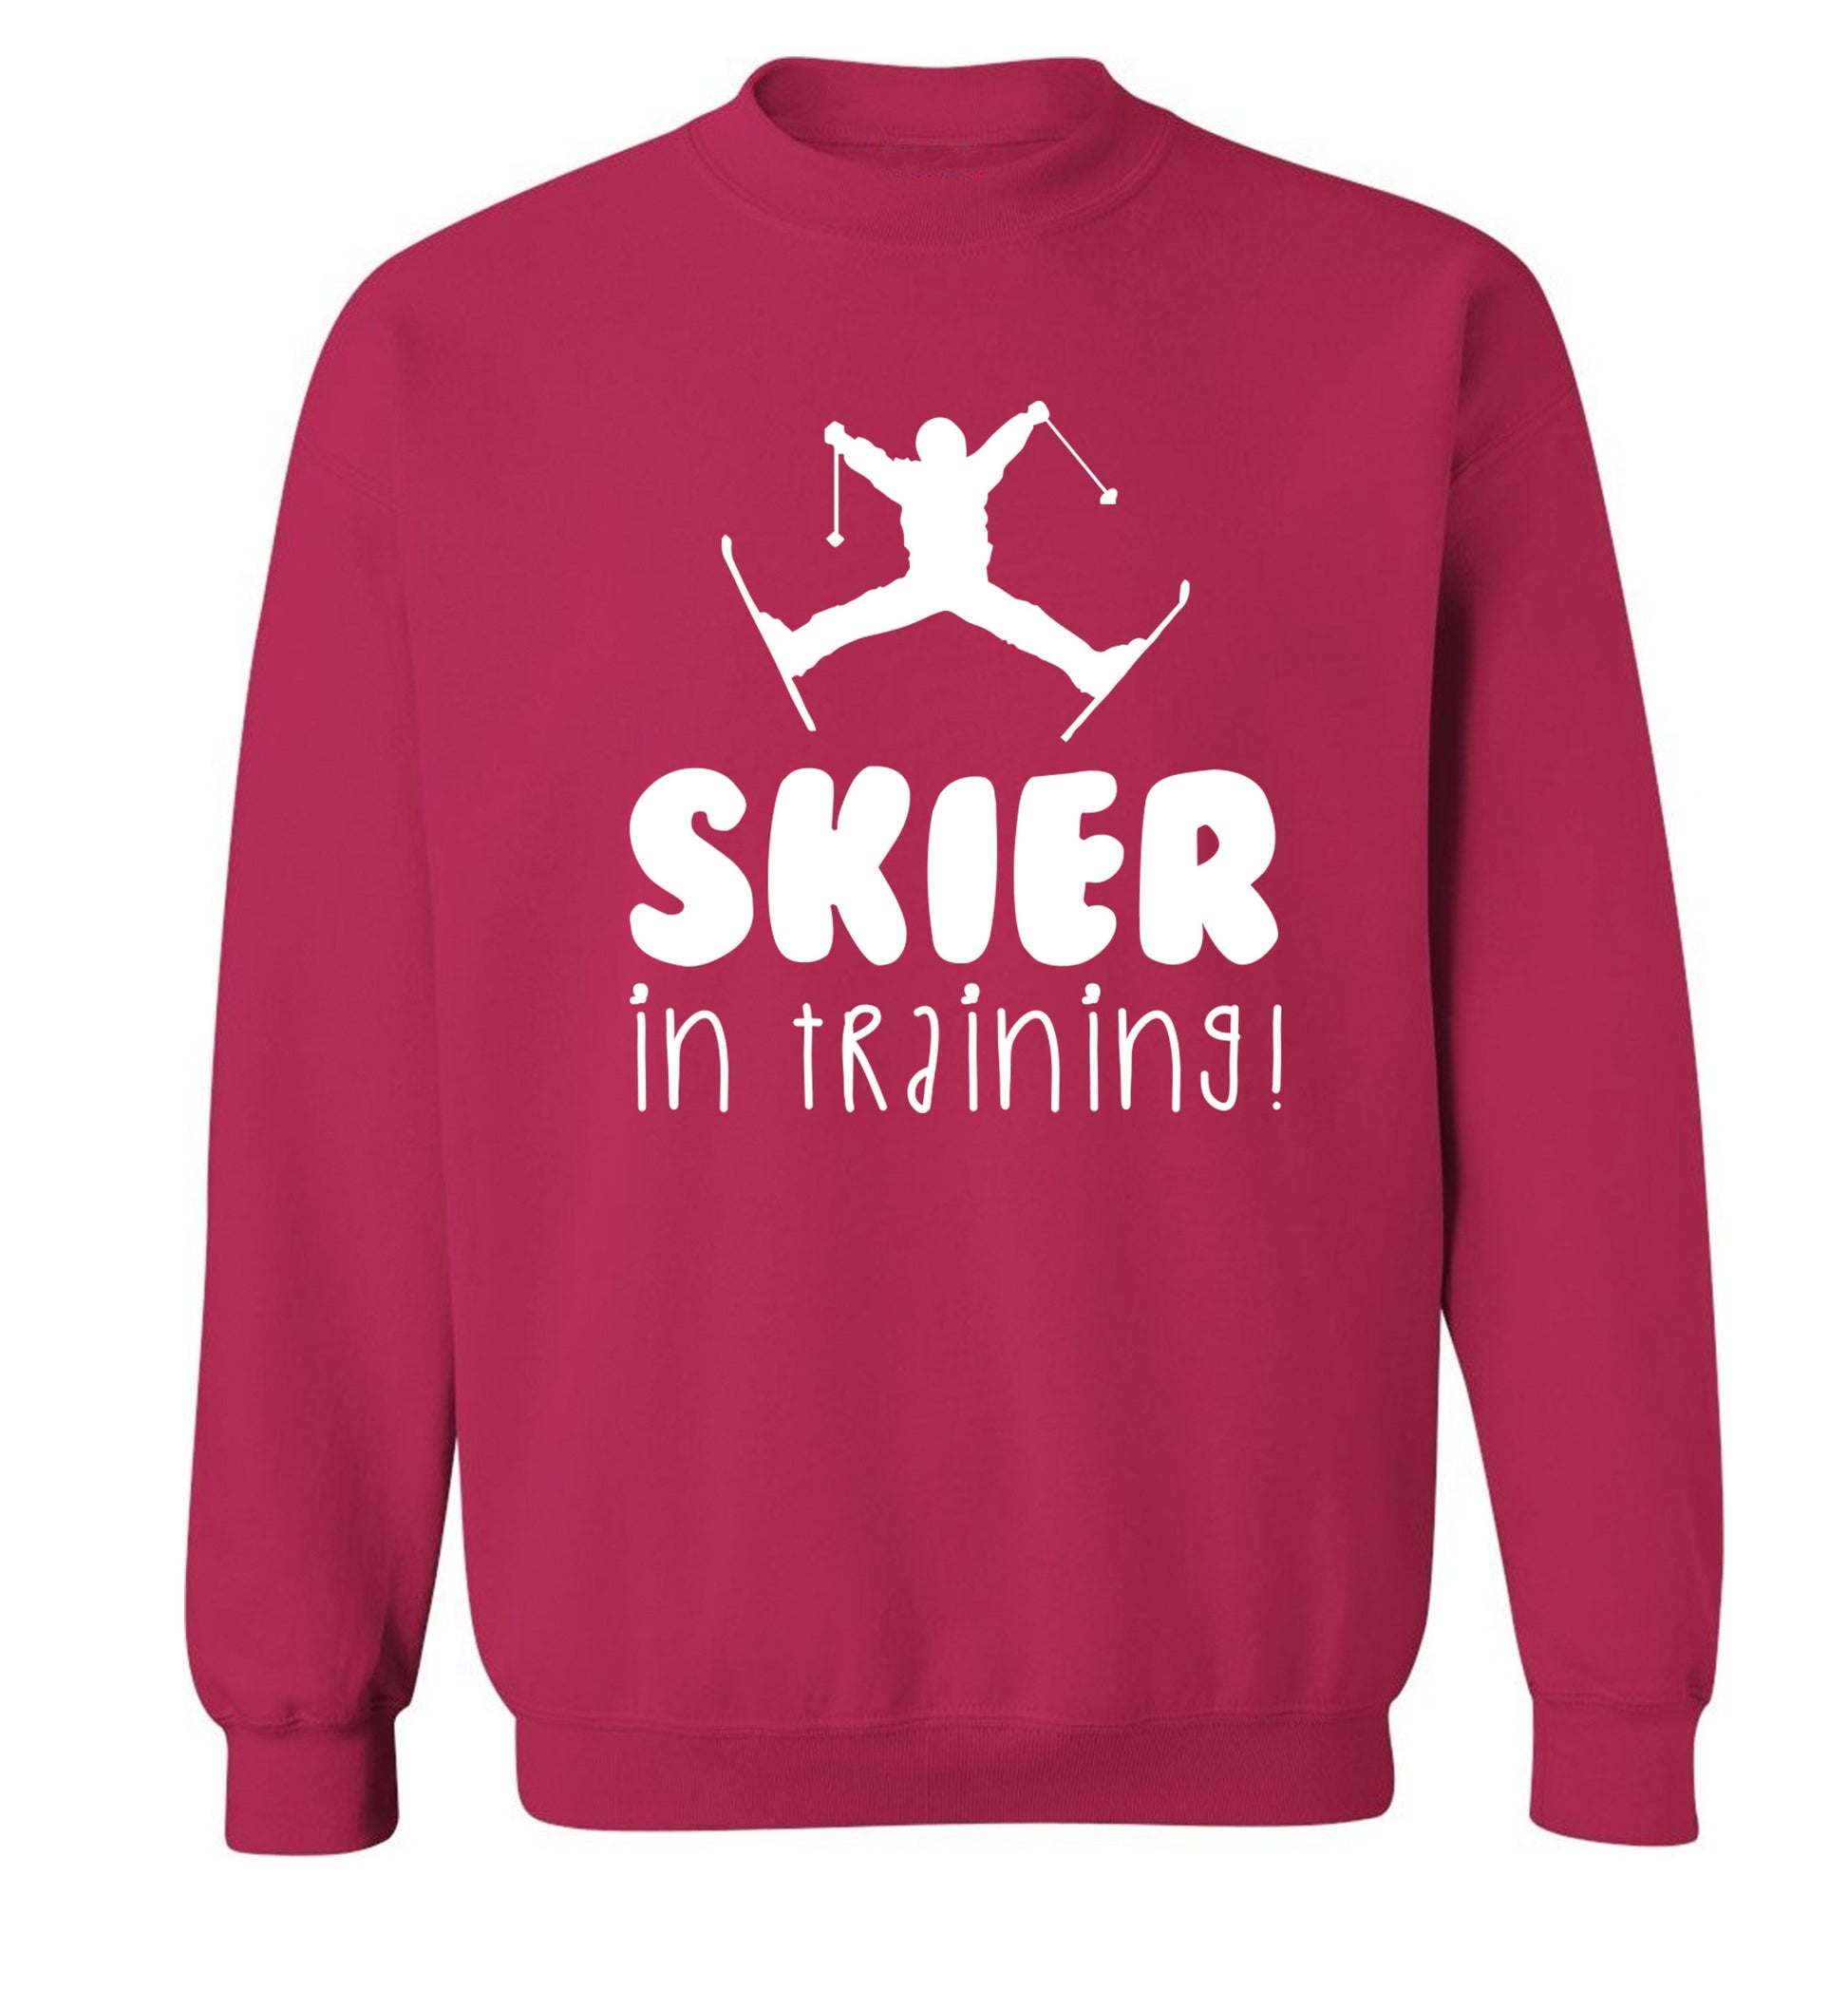 Skier in training Adult's unisex pink Sweater 2XL